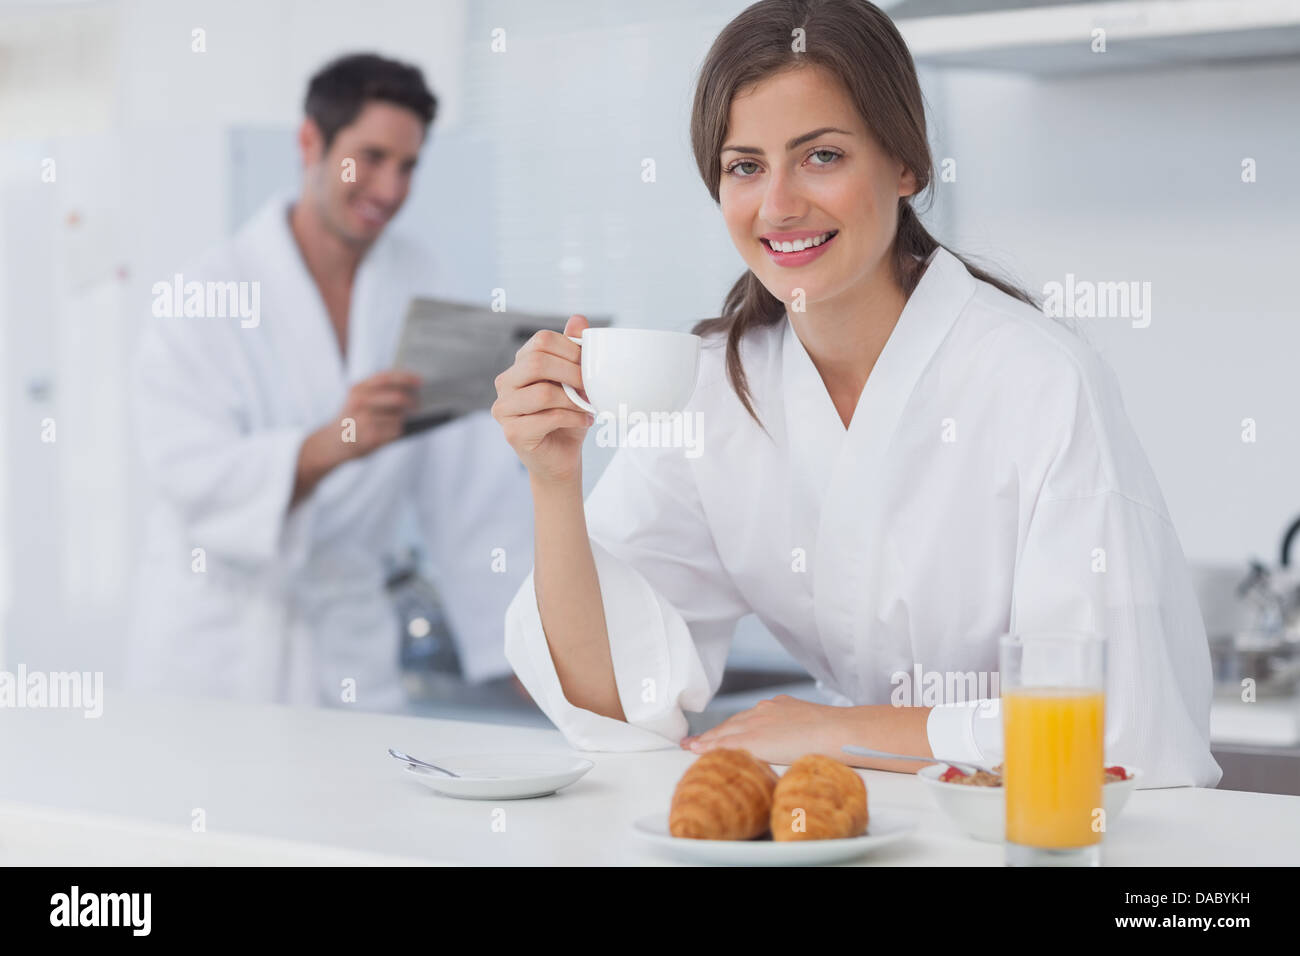 Woman with a dressing gown having breakfast Stock Photo